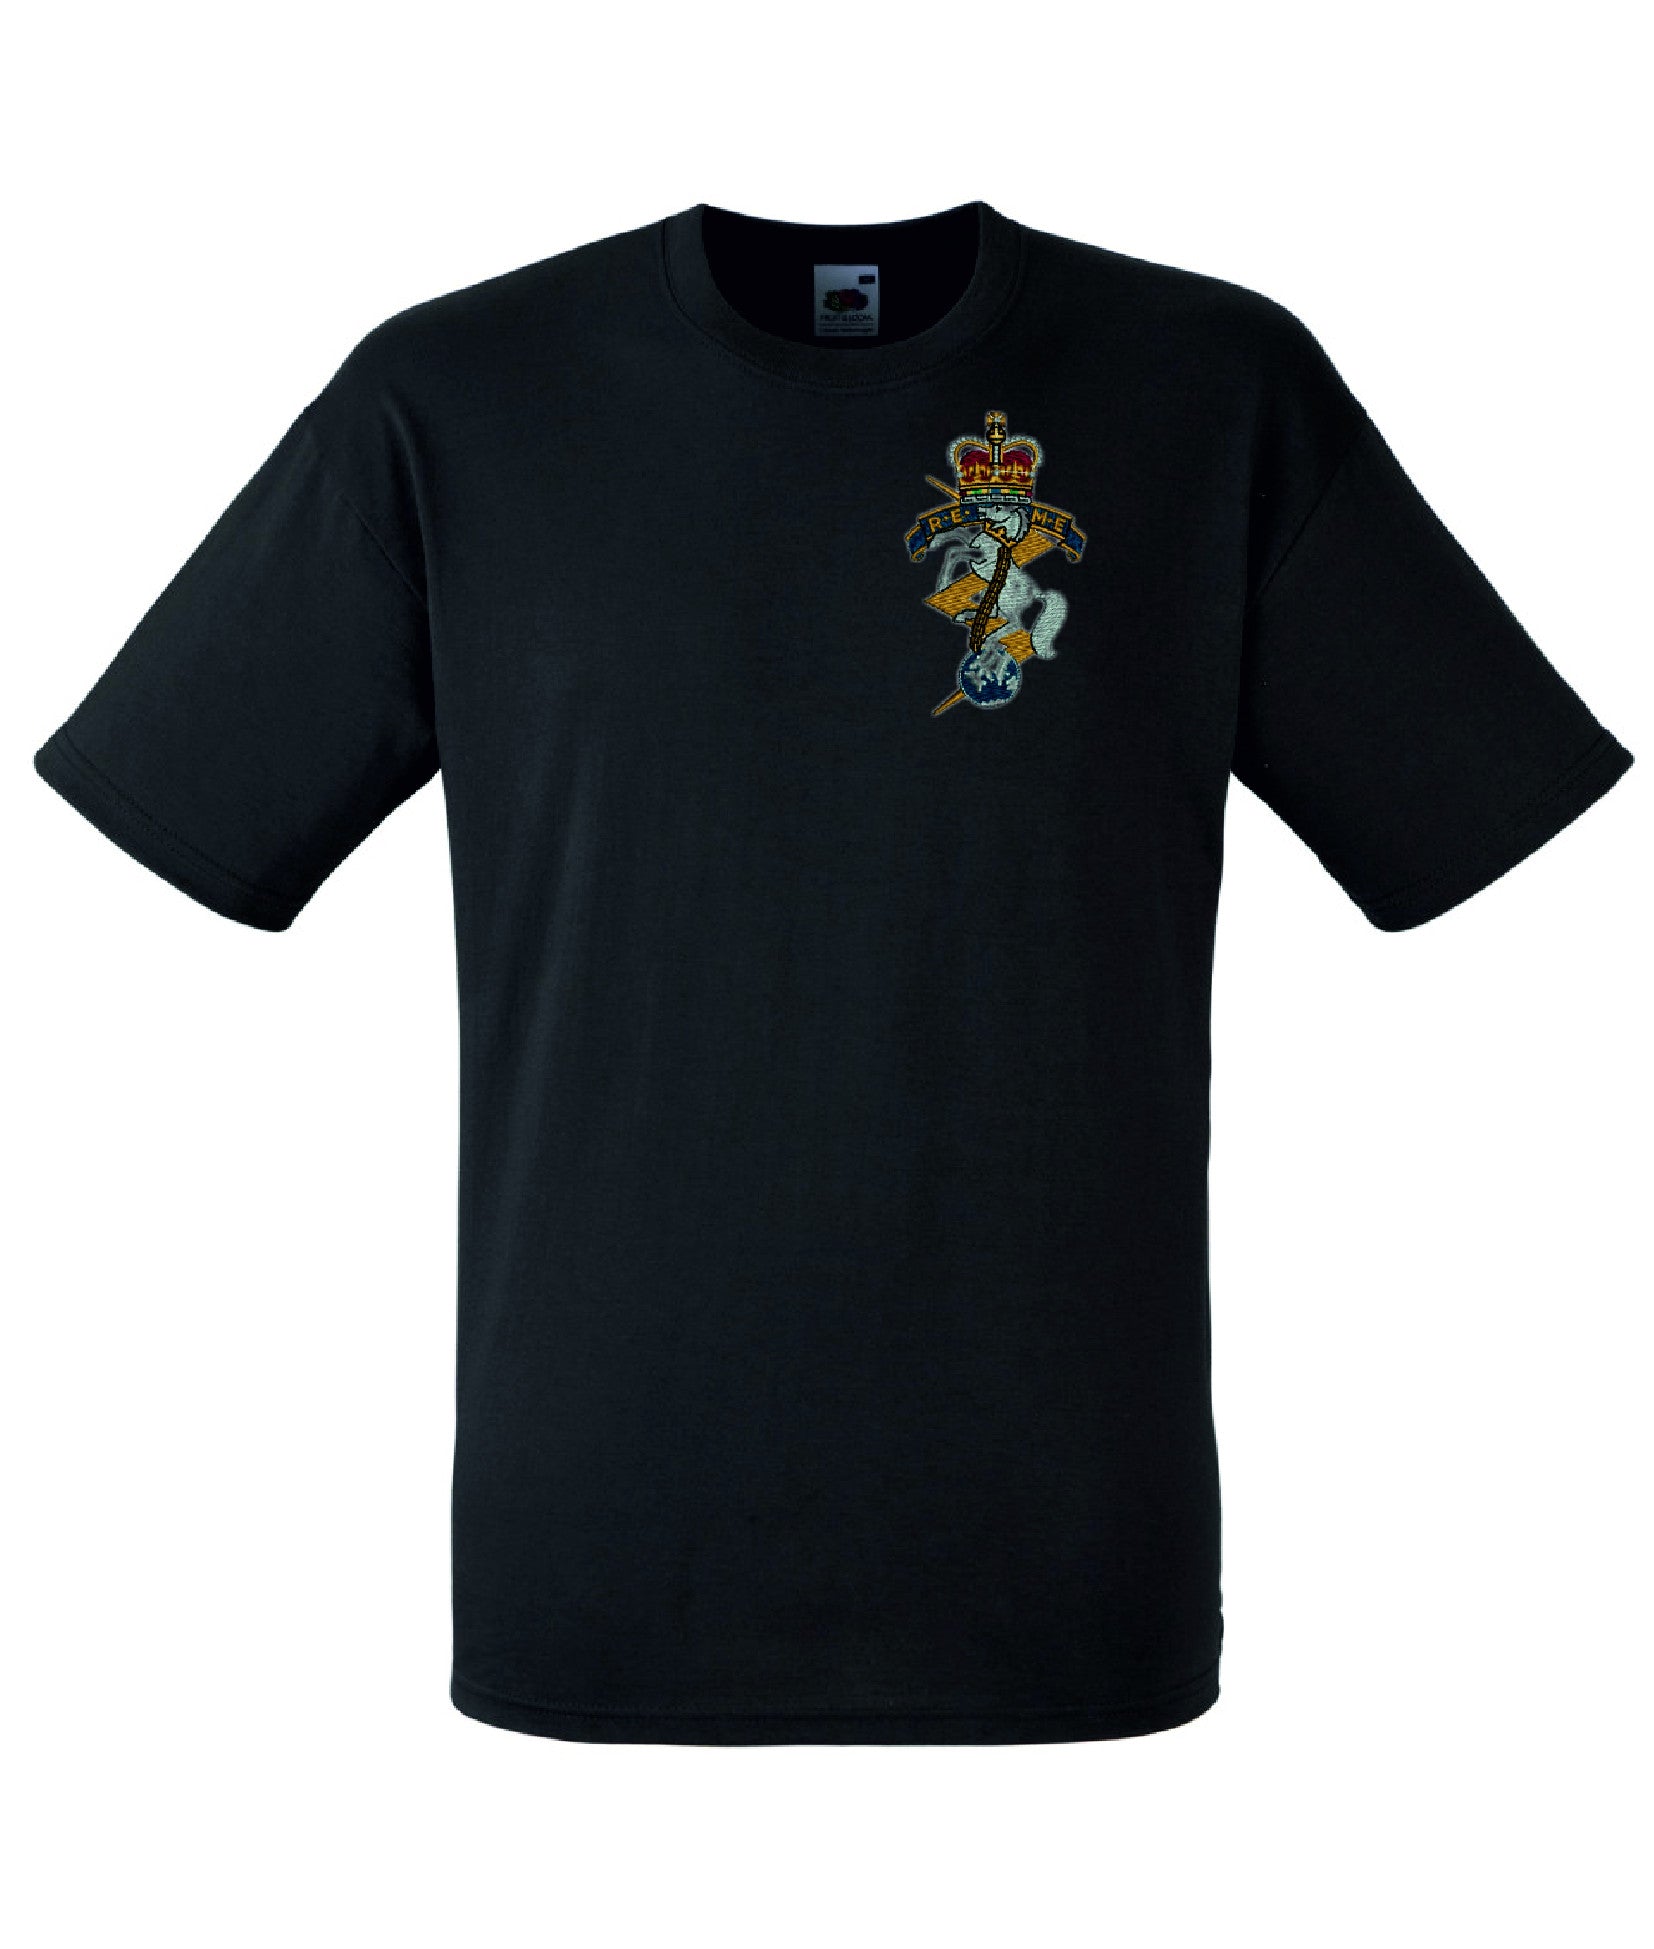 REME T Shirt (Royal Electrical & Mechanical Engineers)